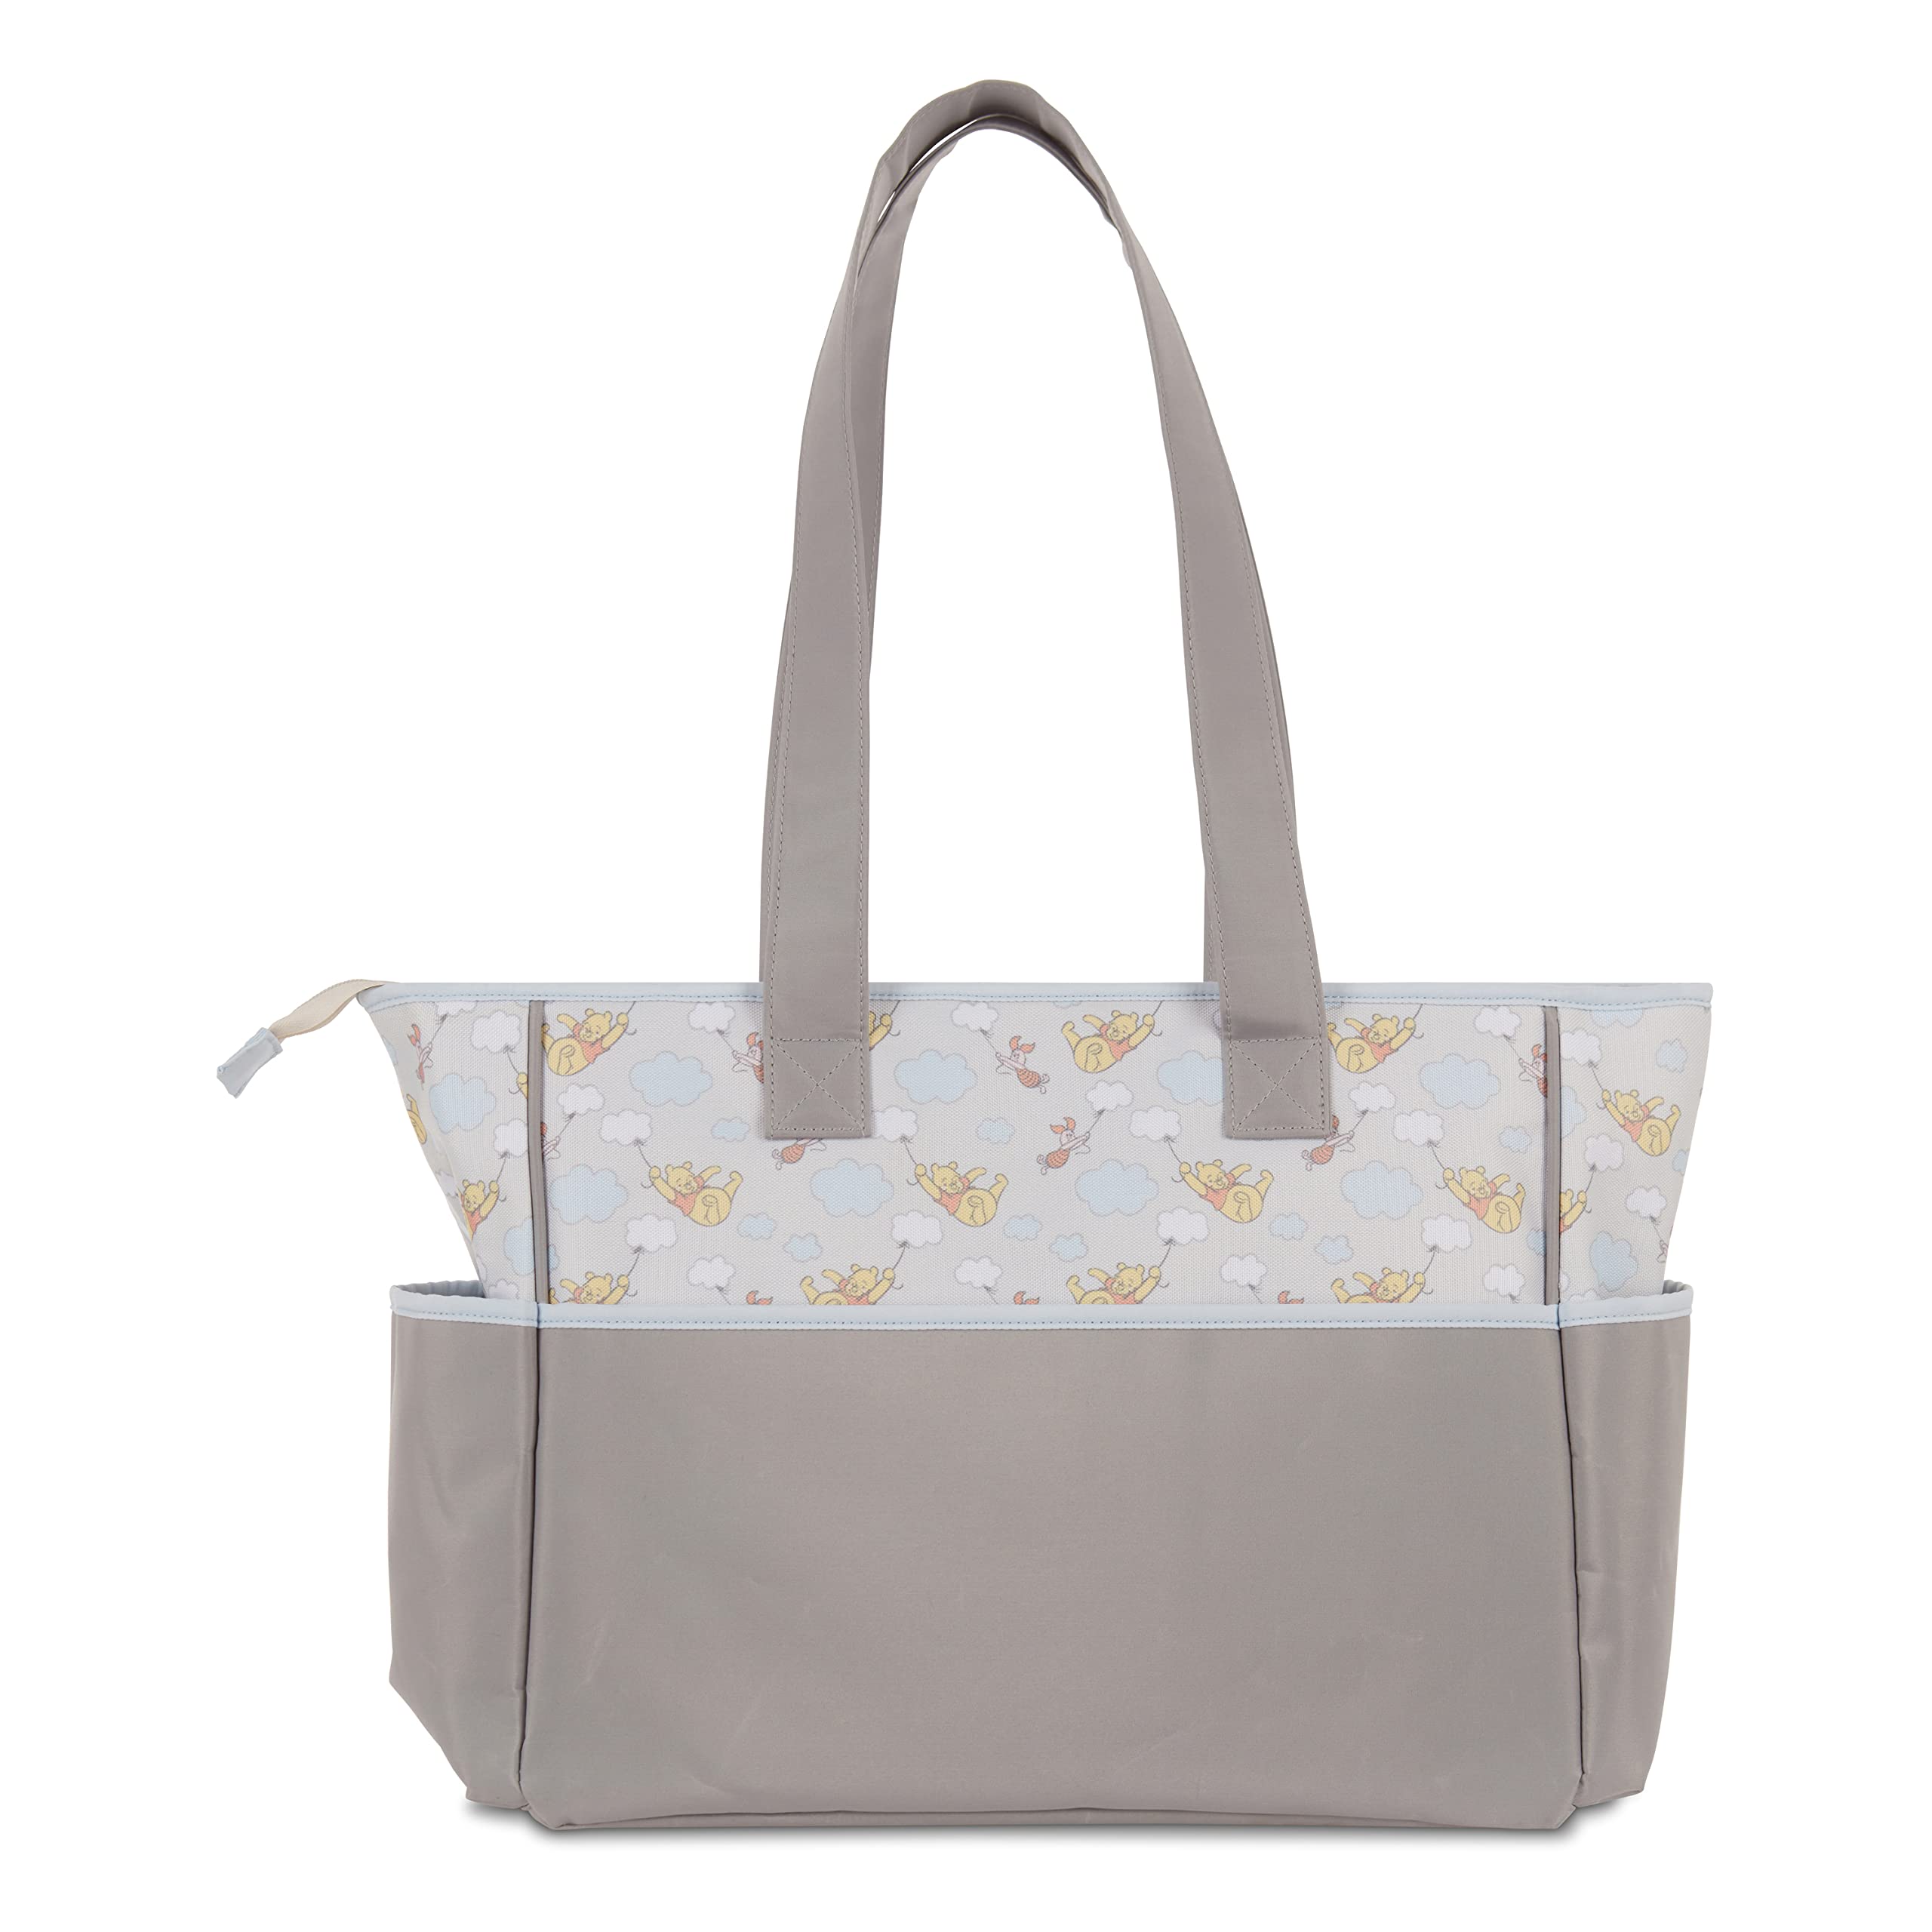 Cudlie Tote Diaper Bag and Changing Pad, Winnie The Pooh Print Large